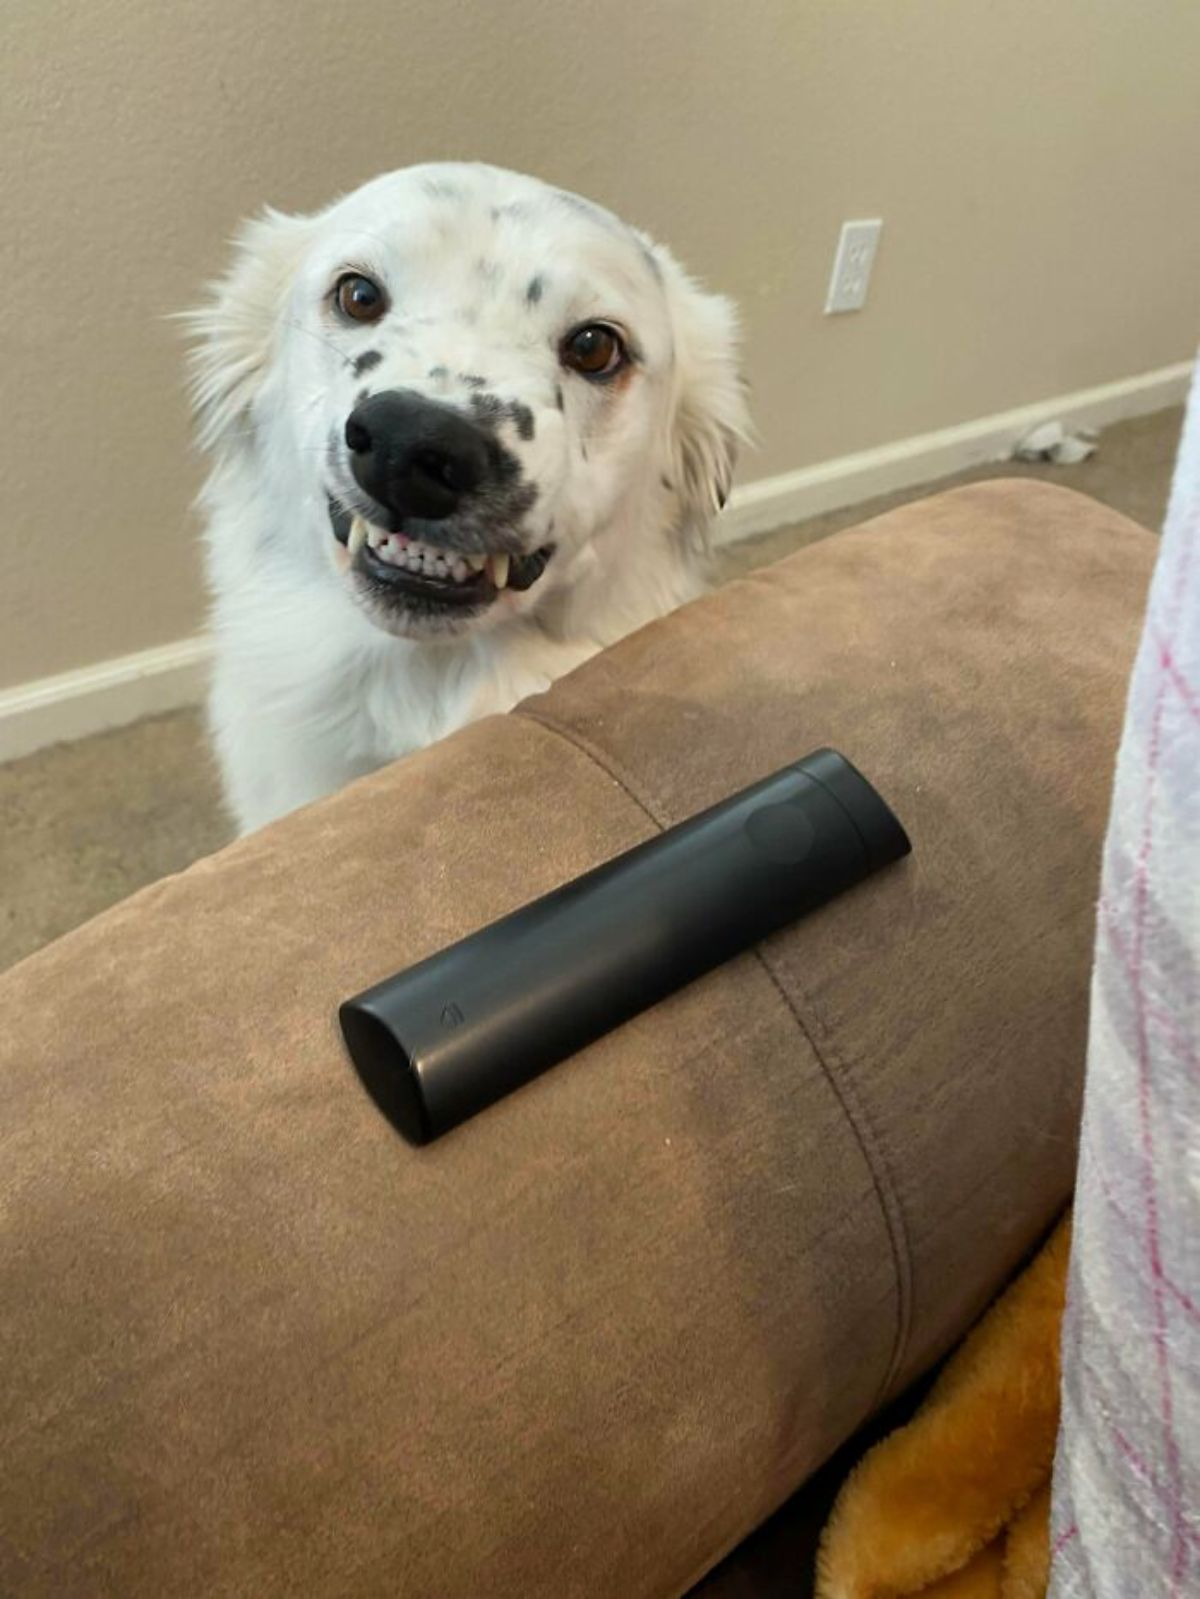 black and white dog sitting with the teeth bared in a smile next to a brown sofa with a black remote on the armrest